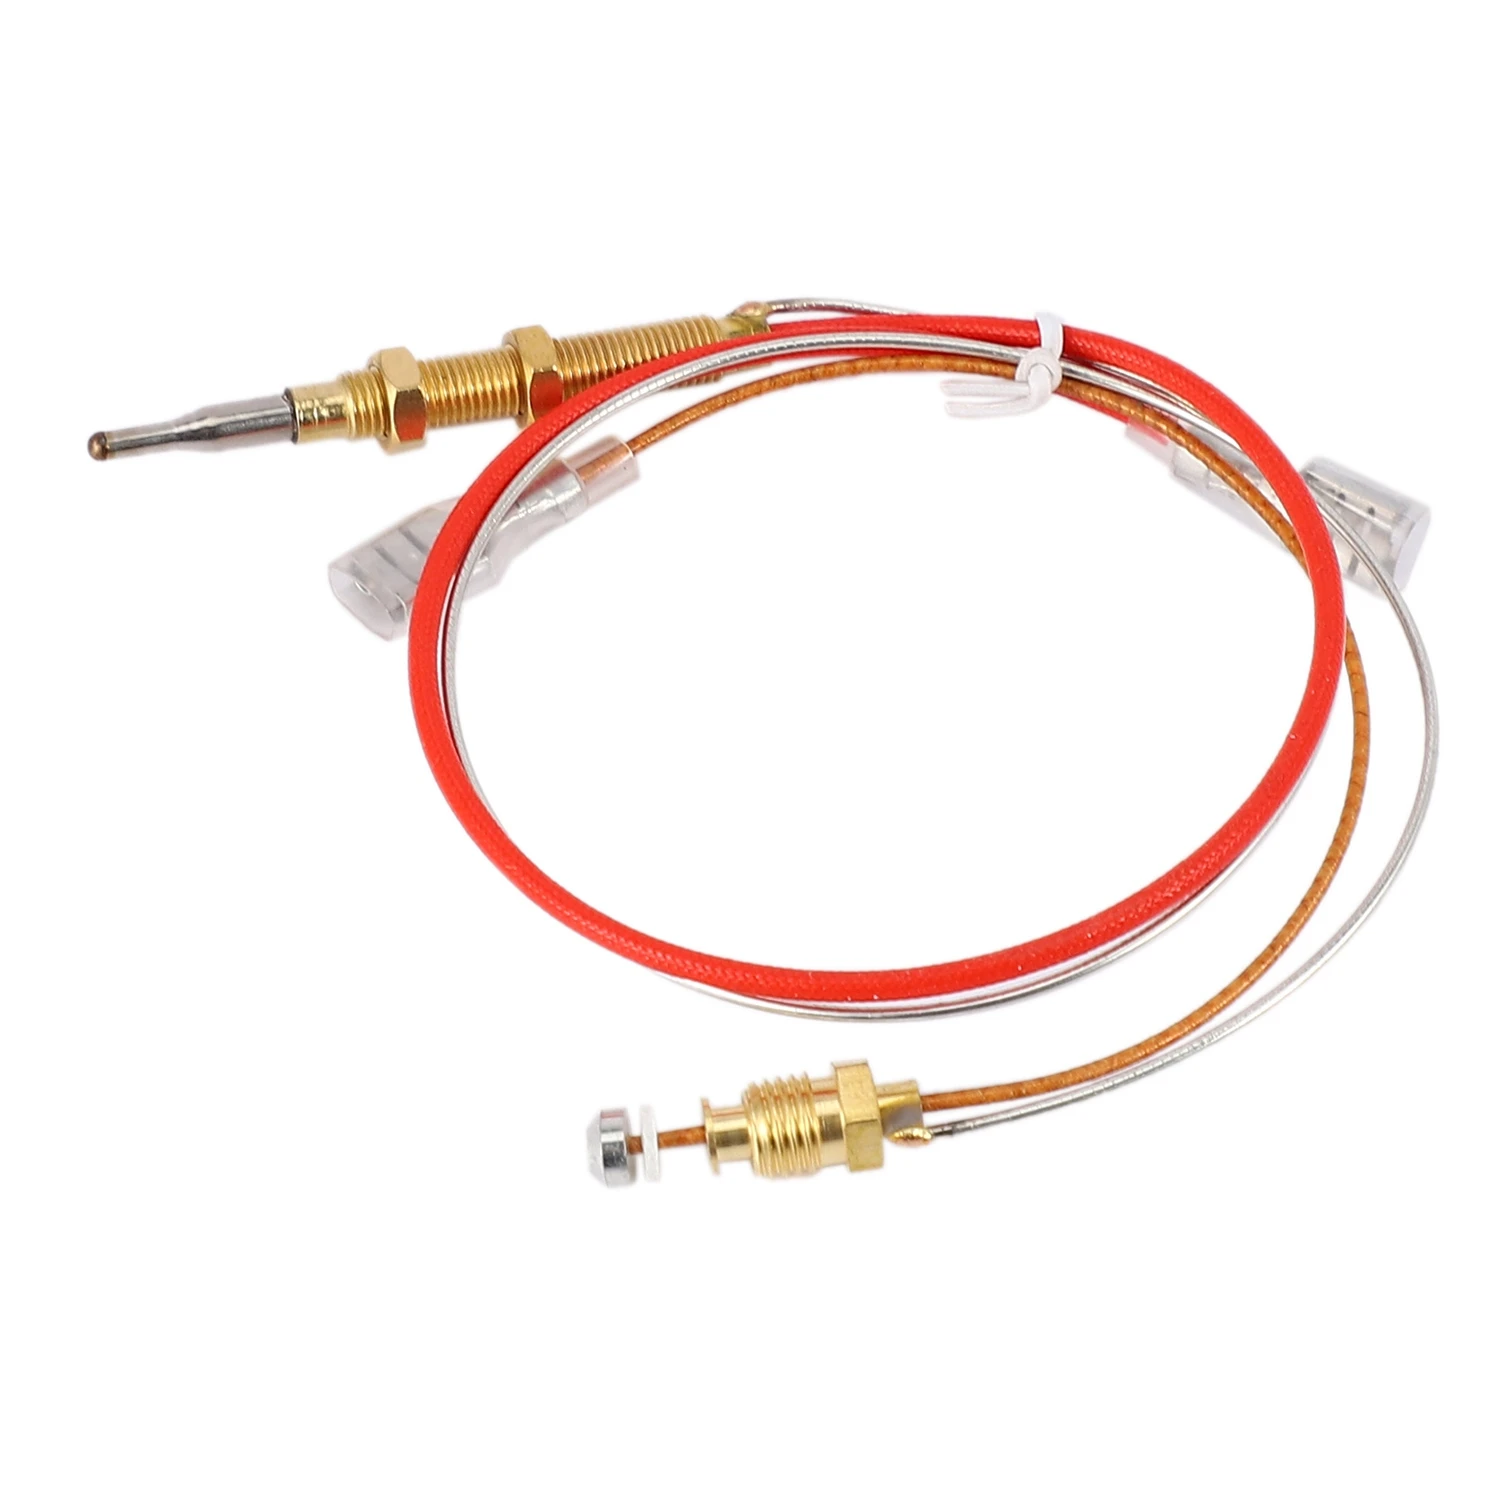 Outdoor Gas Patio Heater M6x0.75 Head Thread M8 End Connection Nuts Thermocouple 